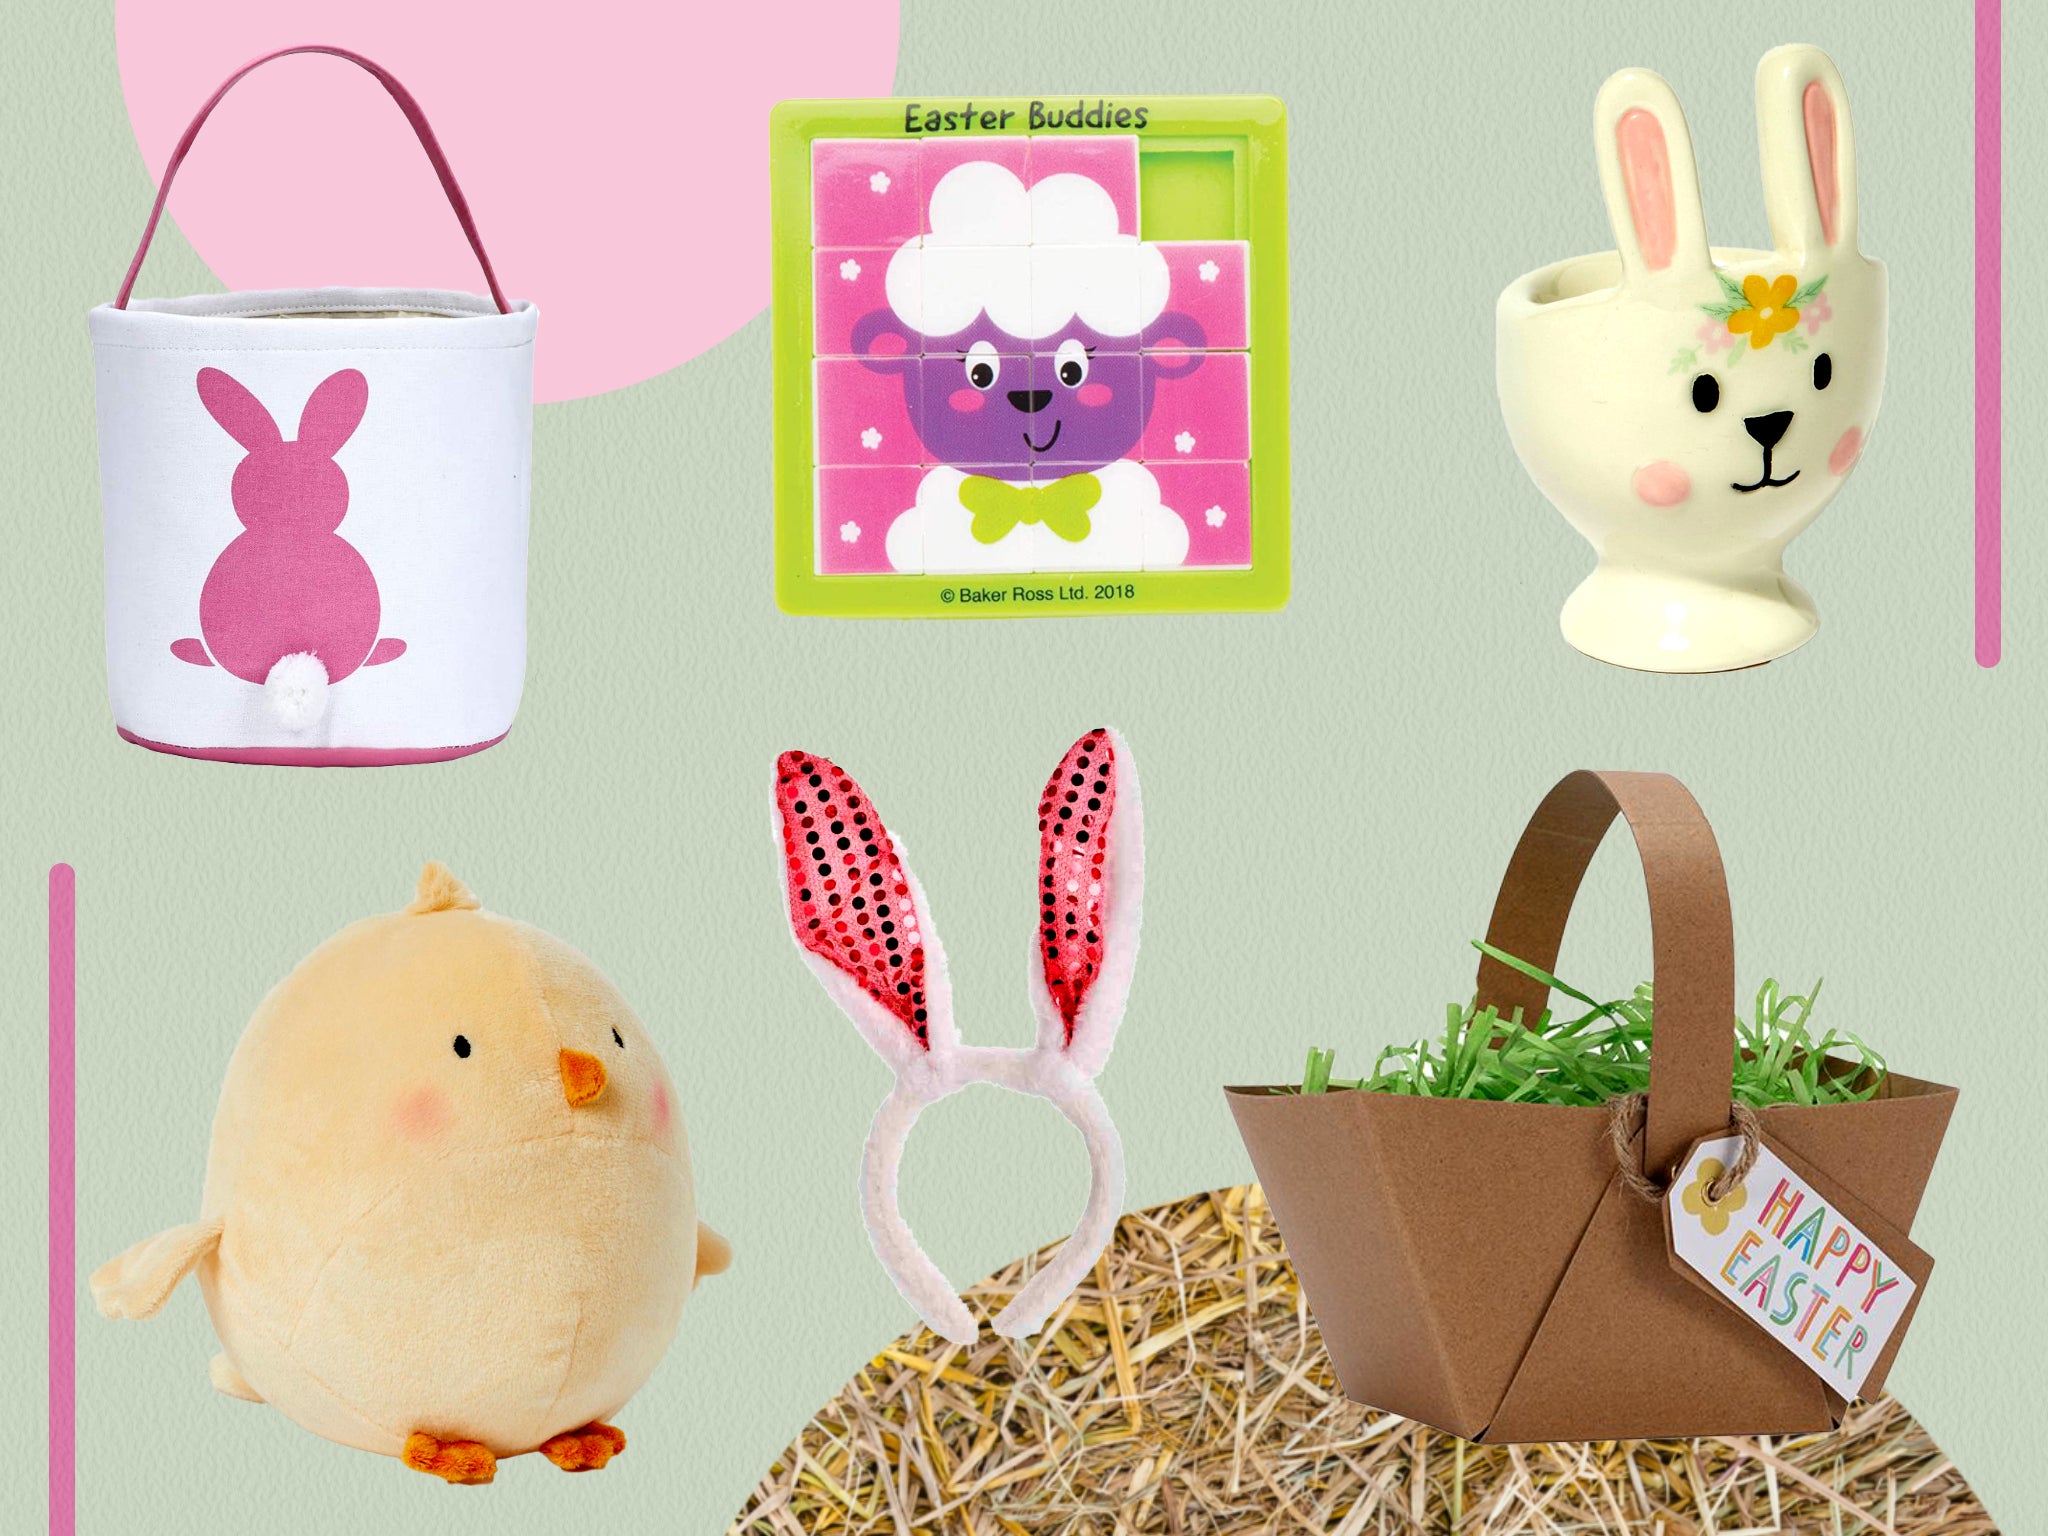 Bunny Ear Bags Round Rabbit Gift Easter Bunny Baskets for Kids to Carry Candy Gifts to Festival Party 